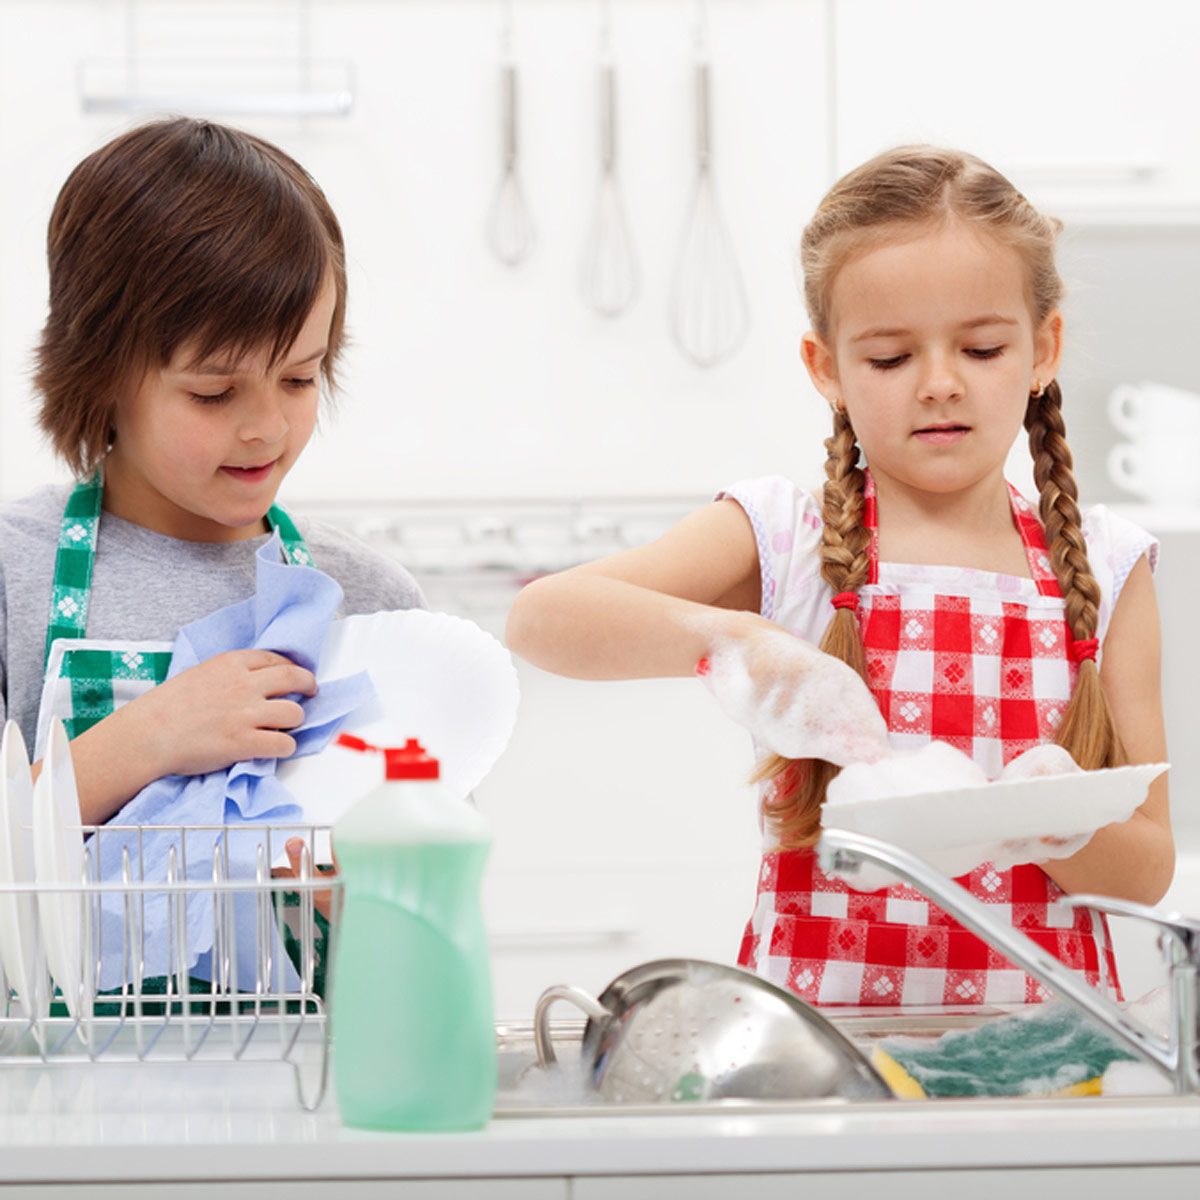 12 Painless Ways to Get Kids to Do Chores